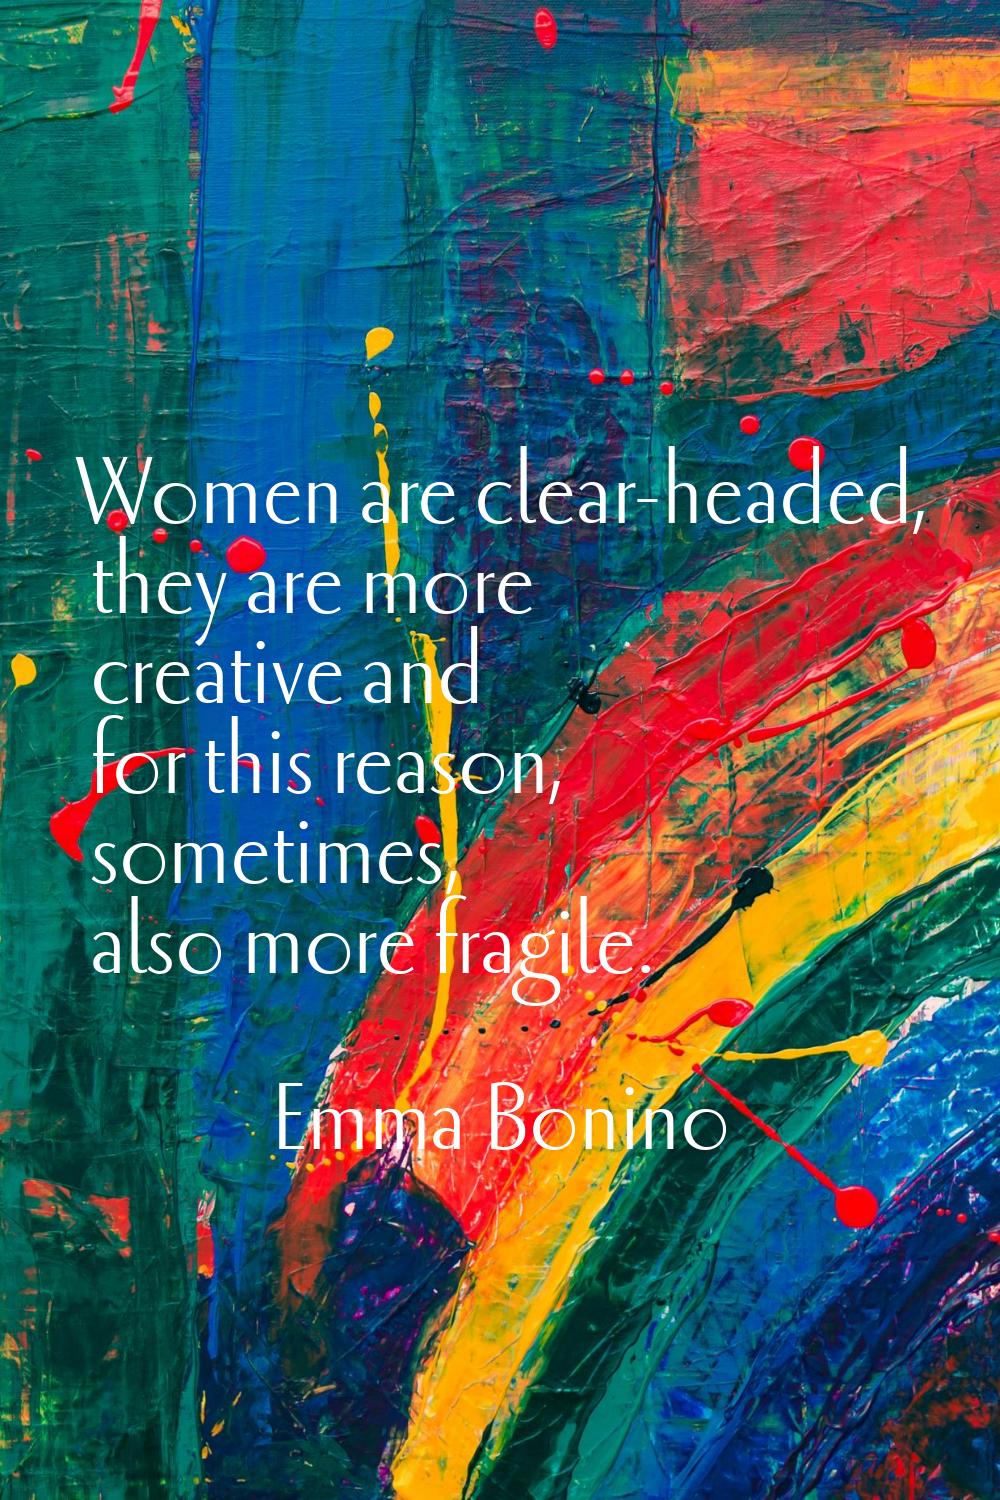 Women are clear-headed, they are more creative and for this reason, sometimes, also more fragile.